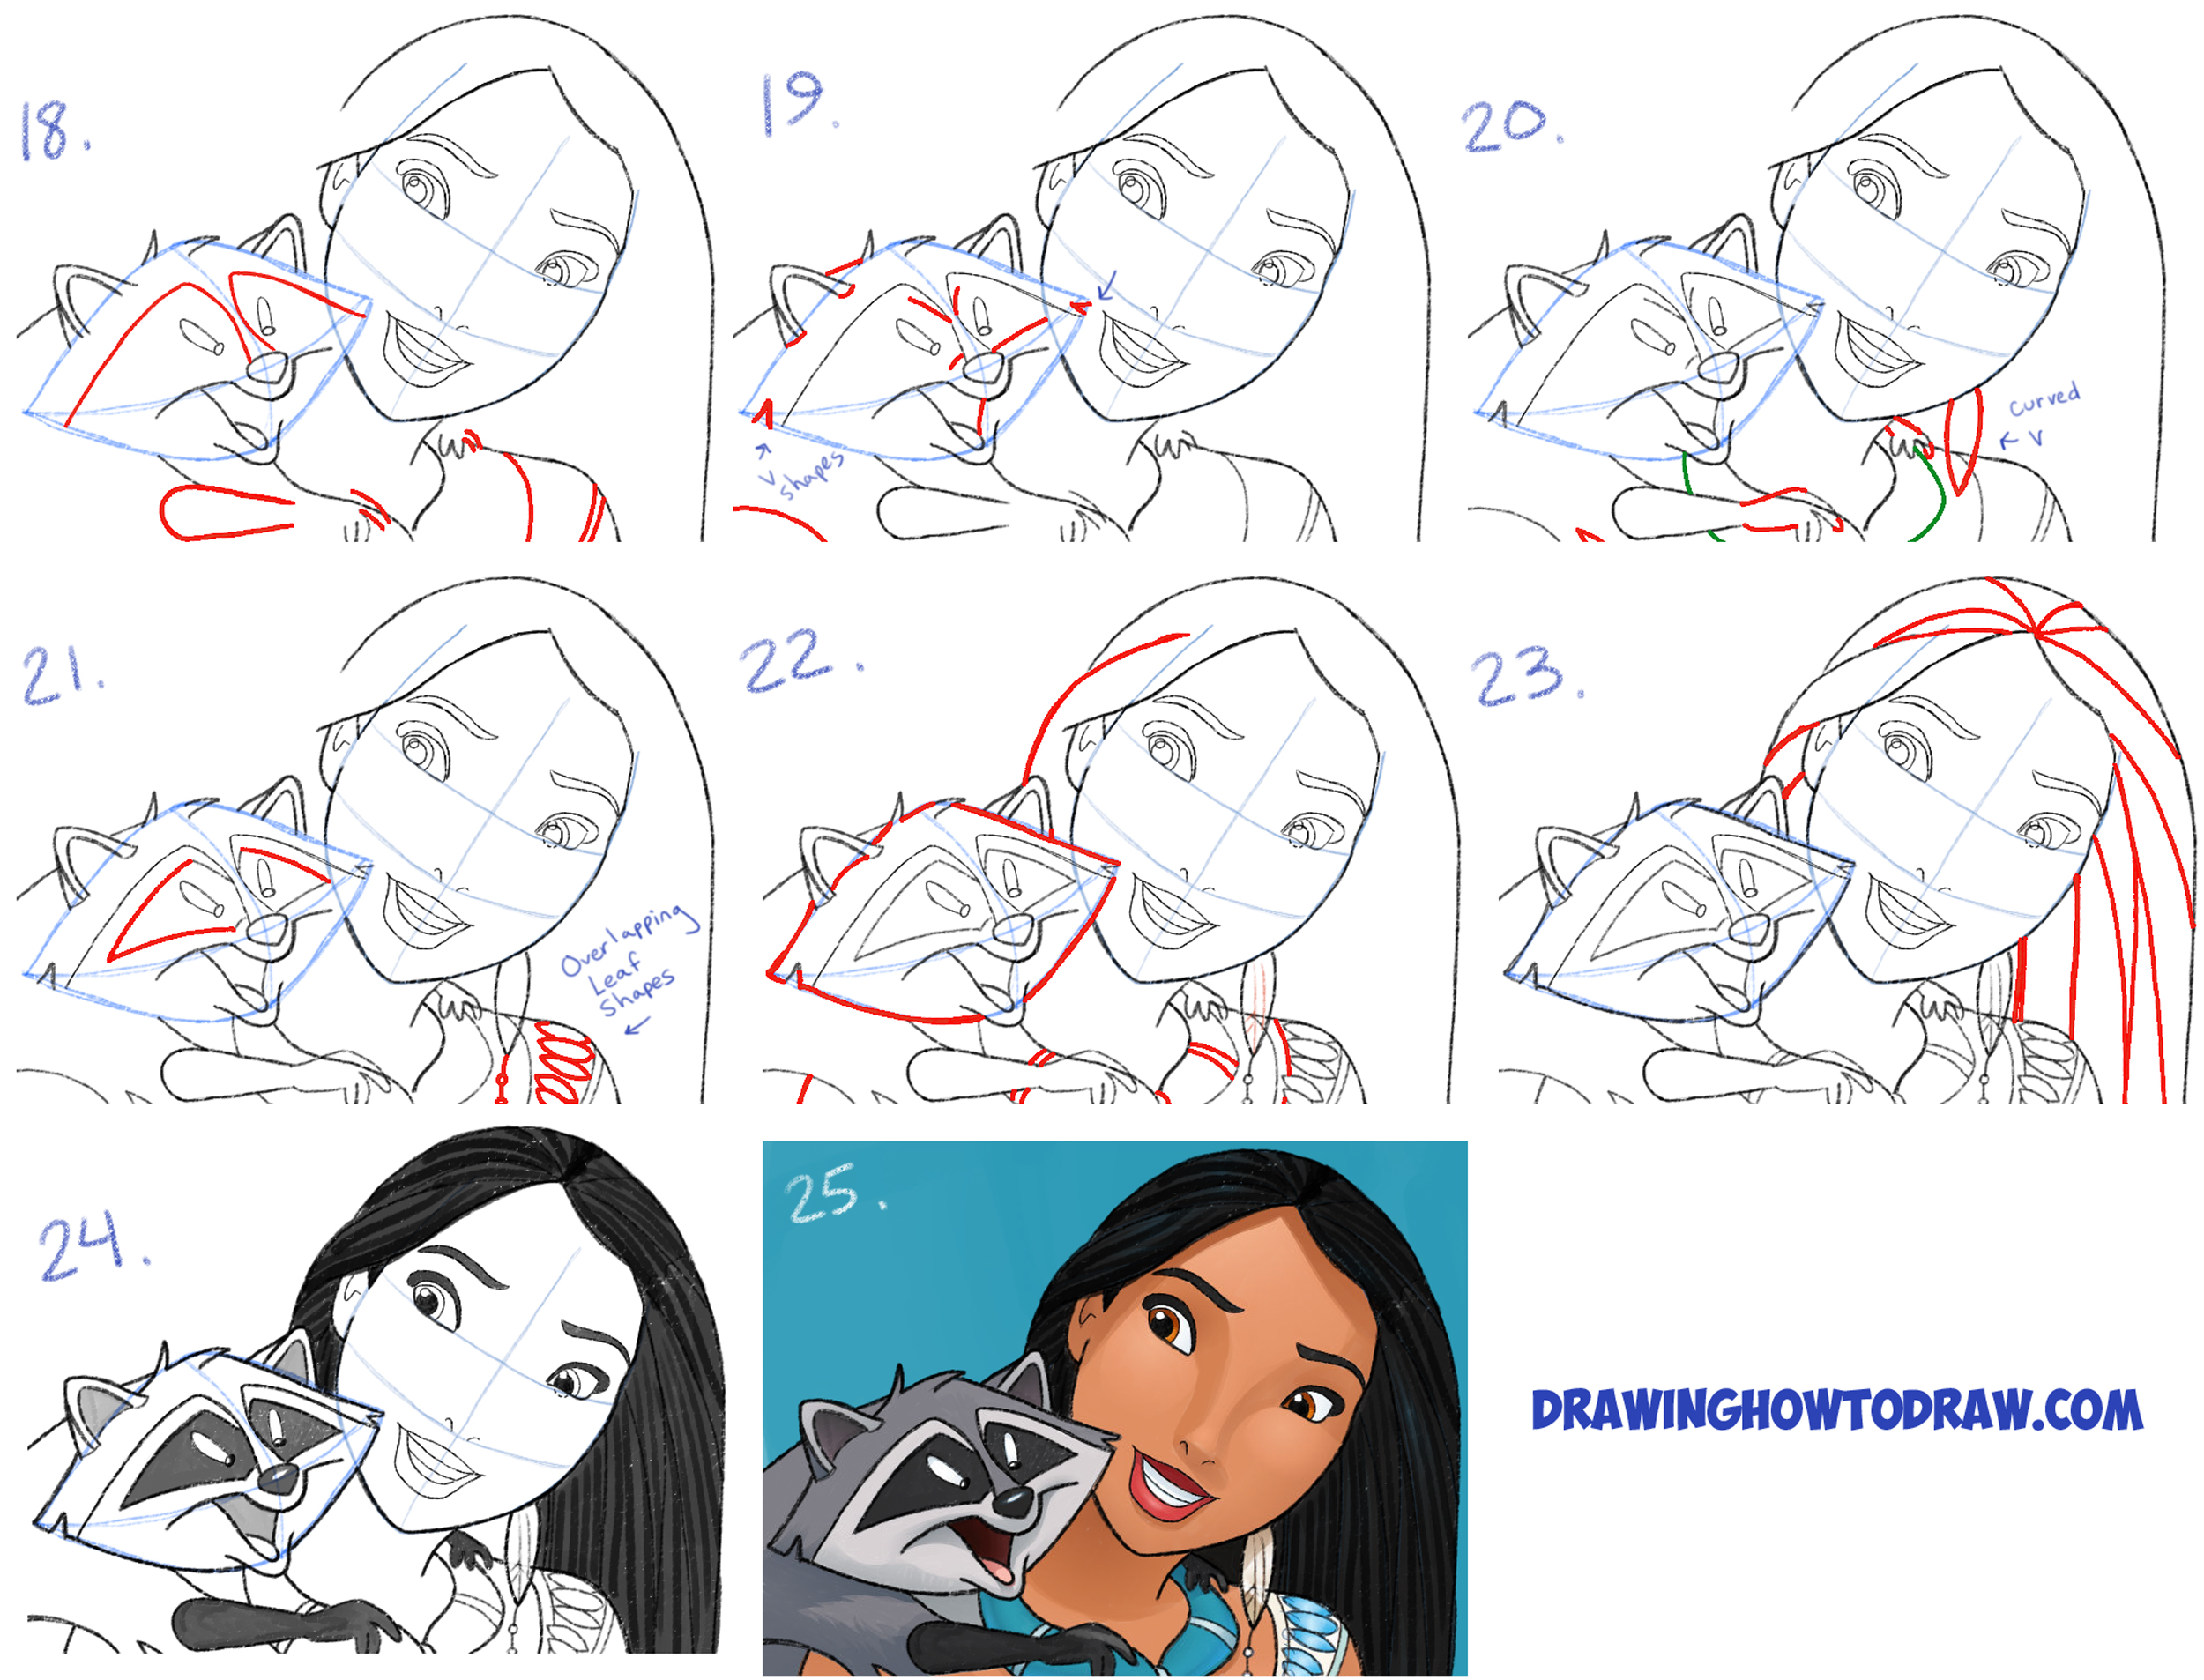 Learn How to Draw Princess Pocahontas's Face and Meeko the Raccoon Simple Steps Drawing Lesson for Kids and Beginners